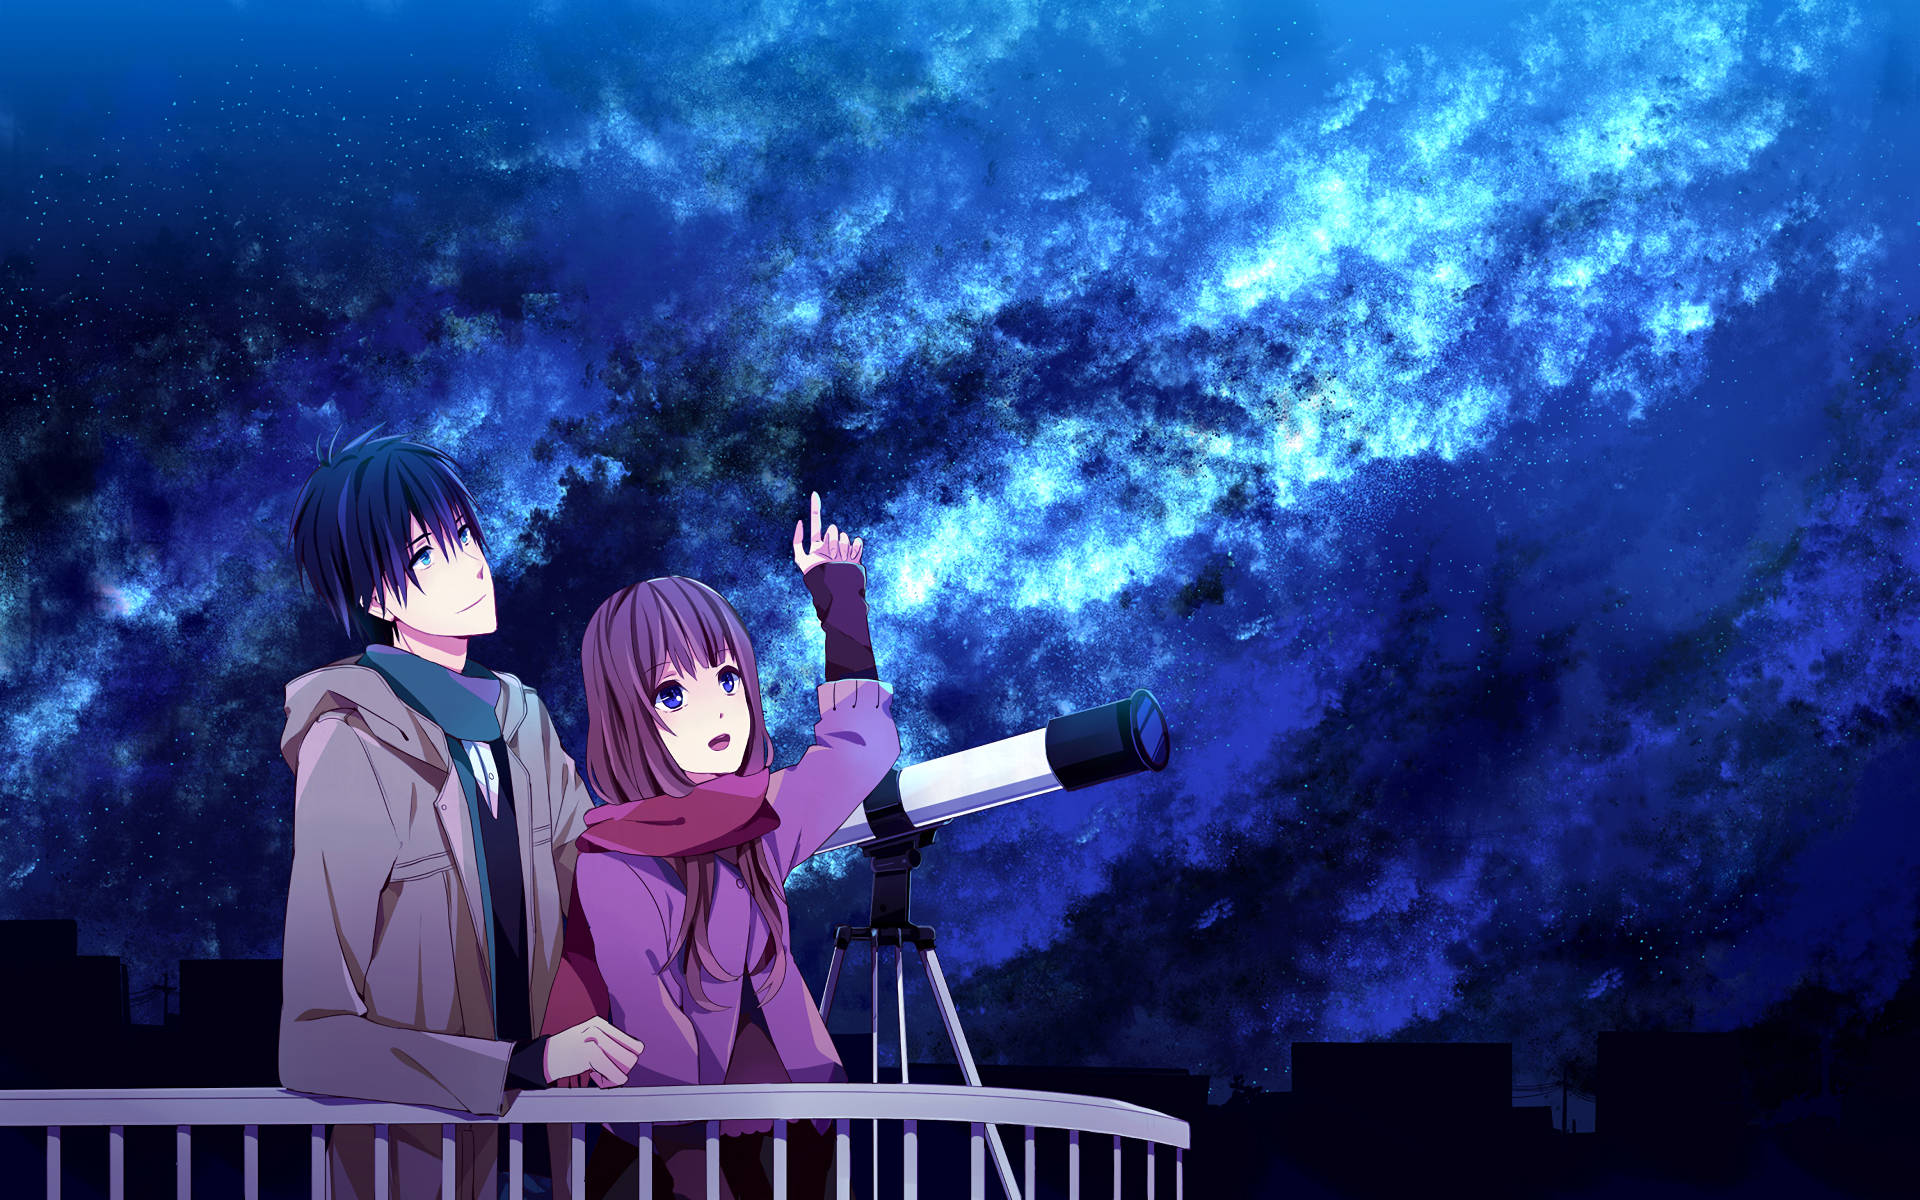 Anime Couple Stargazing With A Telescope Wallpaper